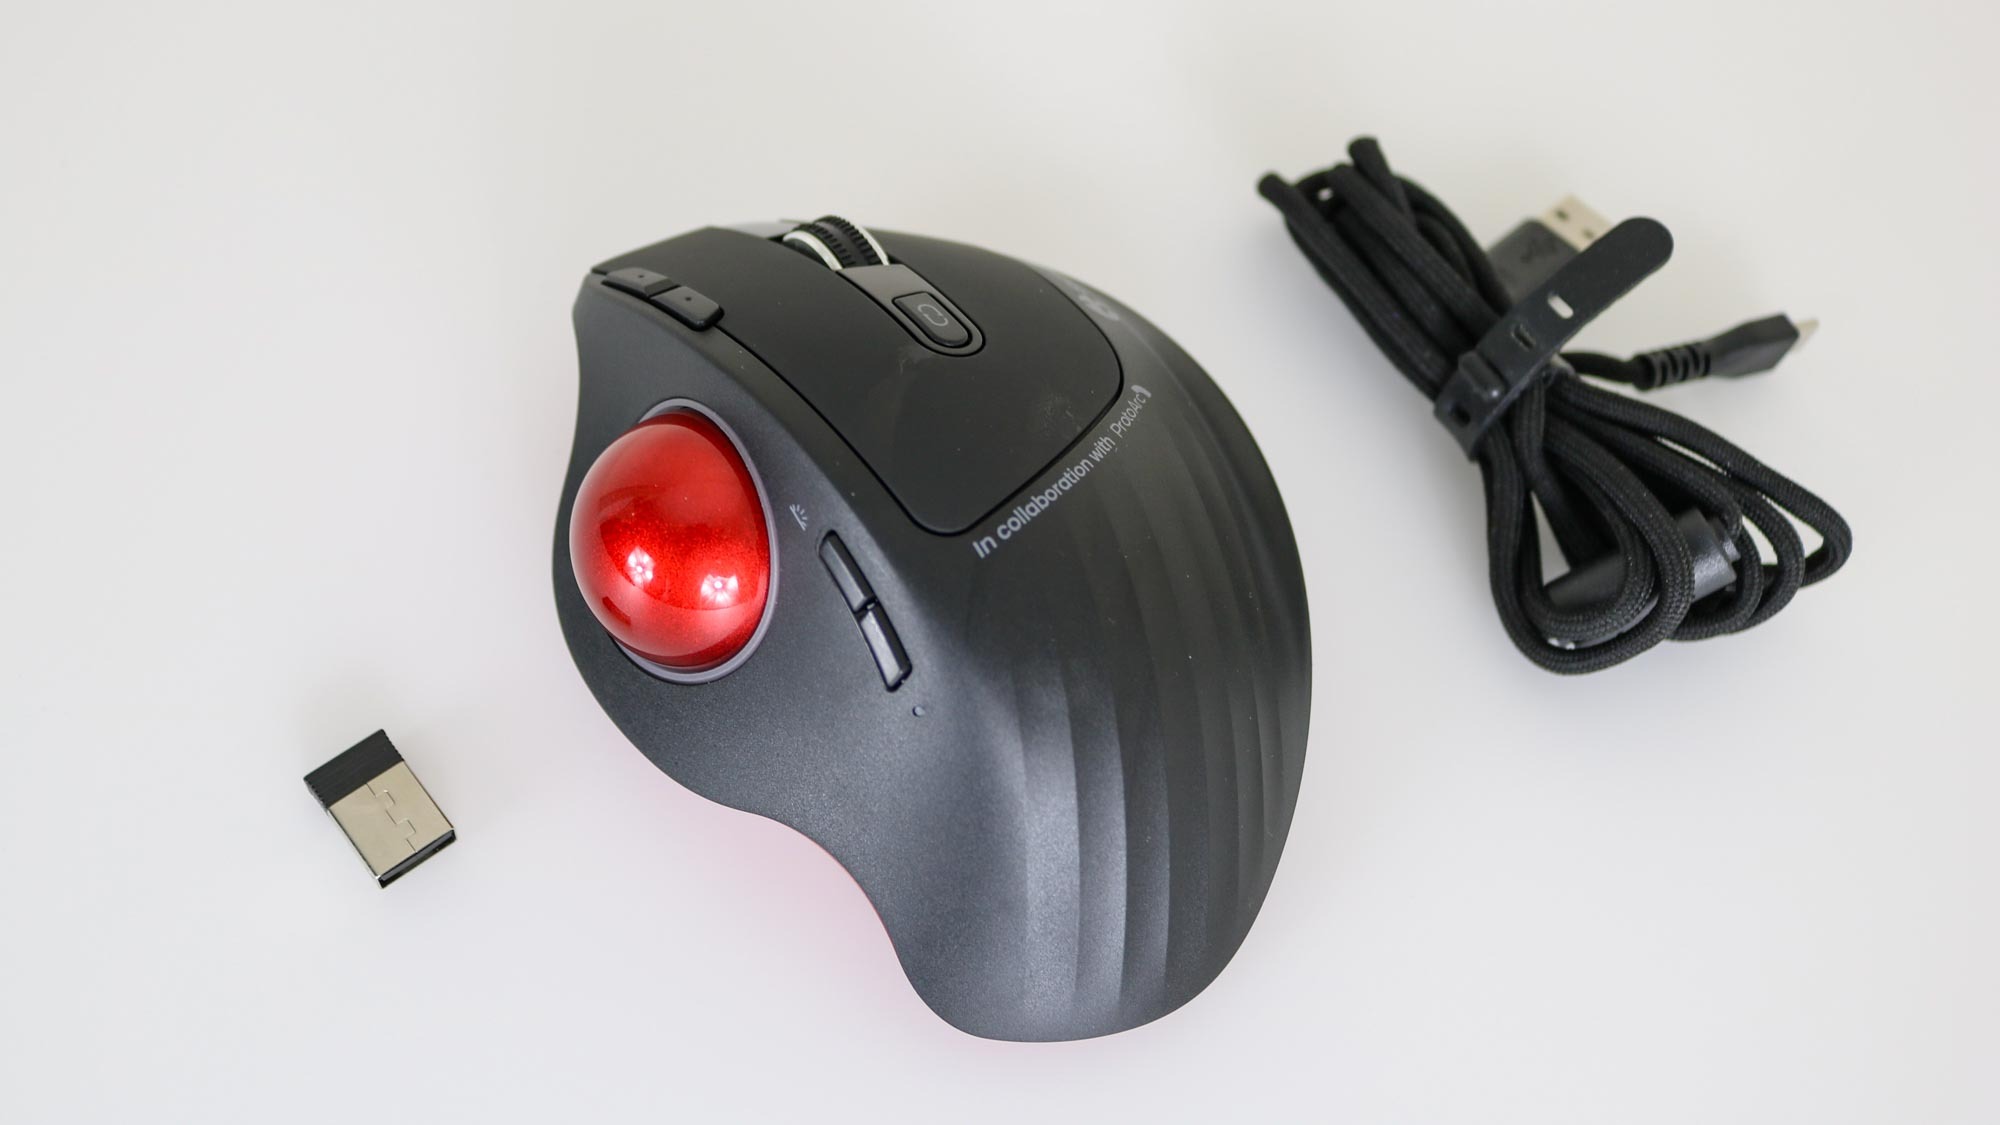 The GameBall Thumb trackball next to all of the accessories it comes with